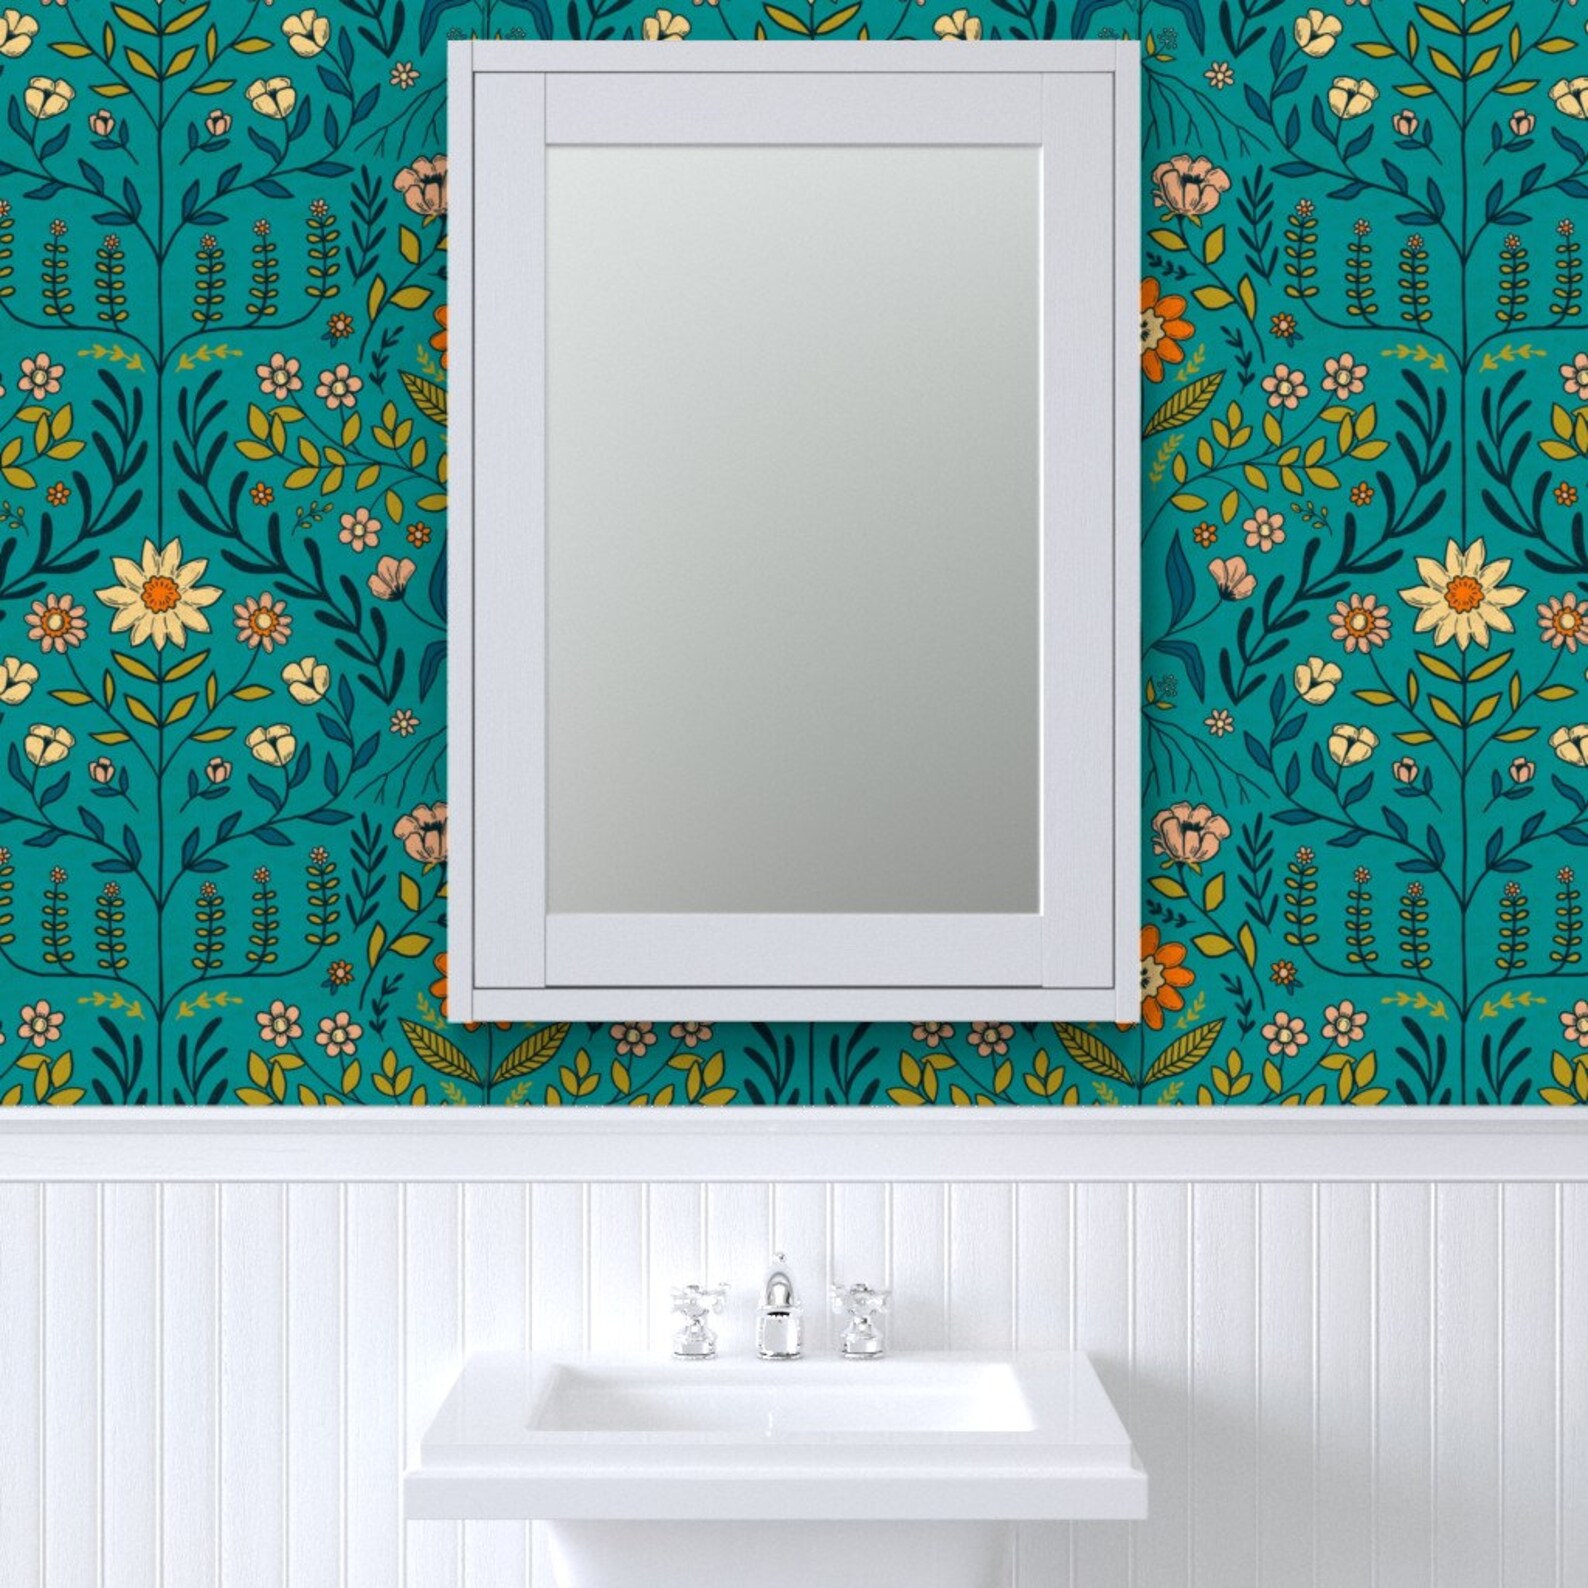 Vintage Damask Wallpaper Brittany Turquoise by - Etsy